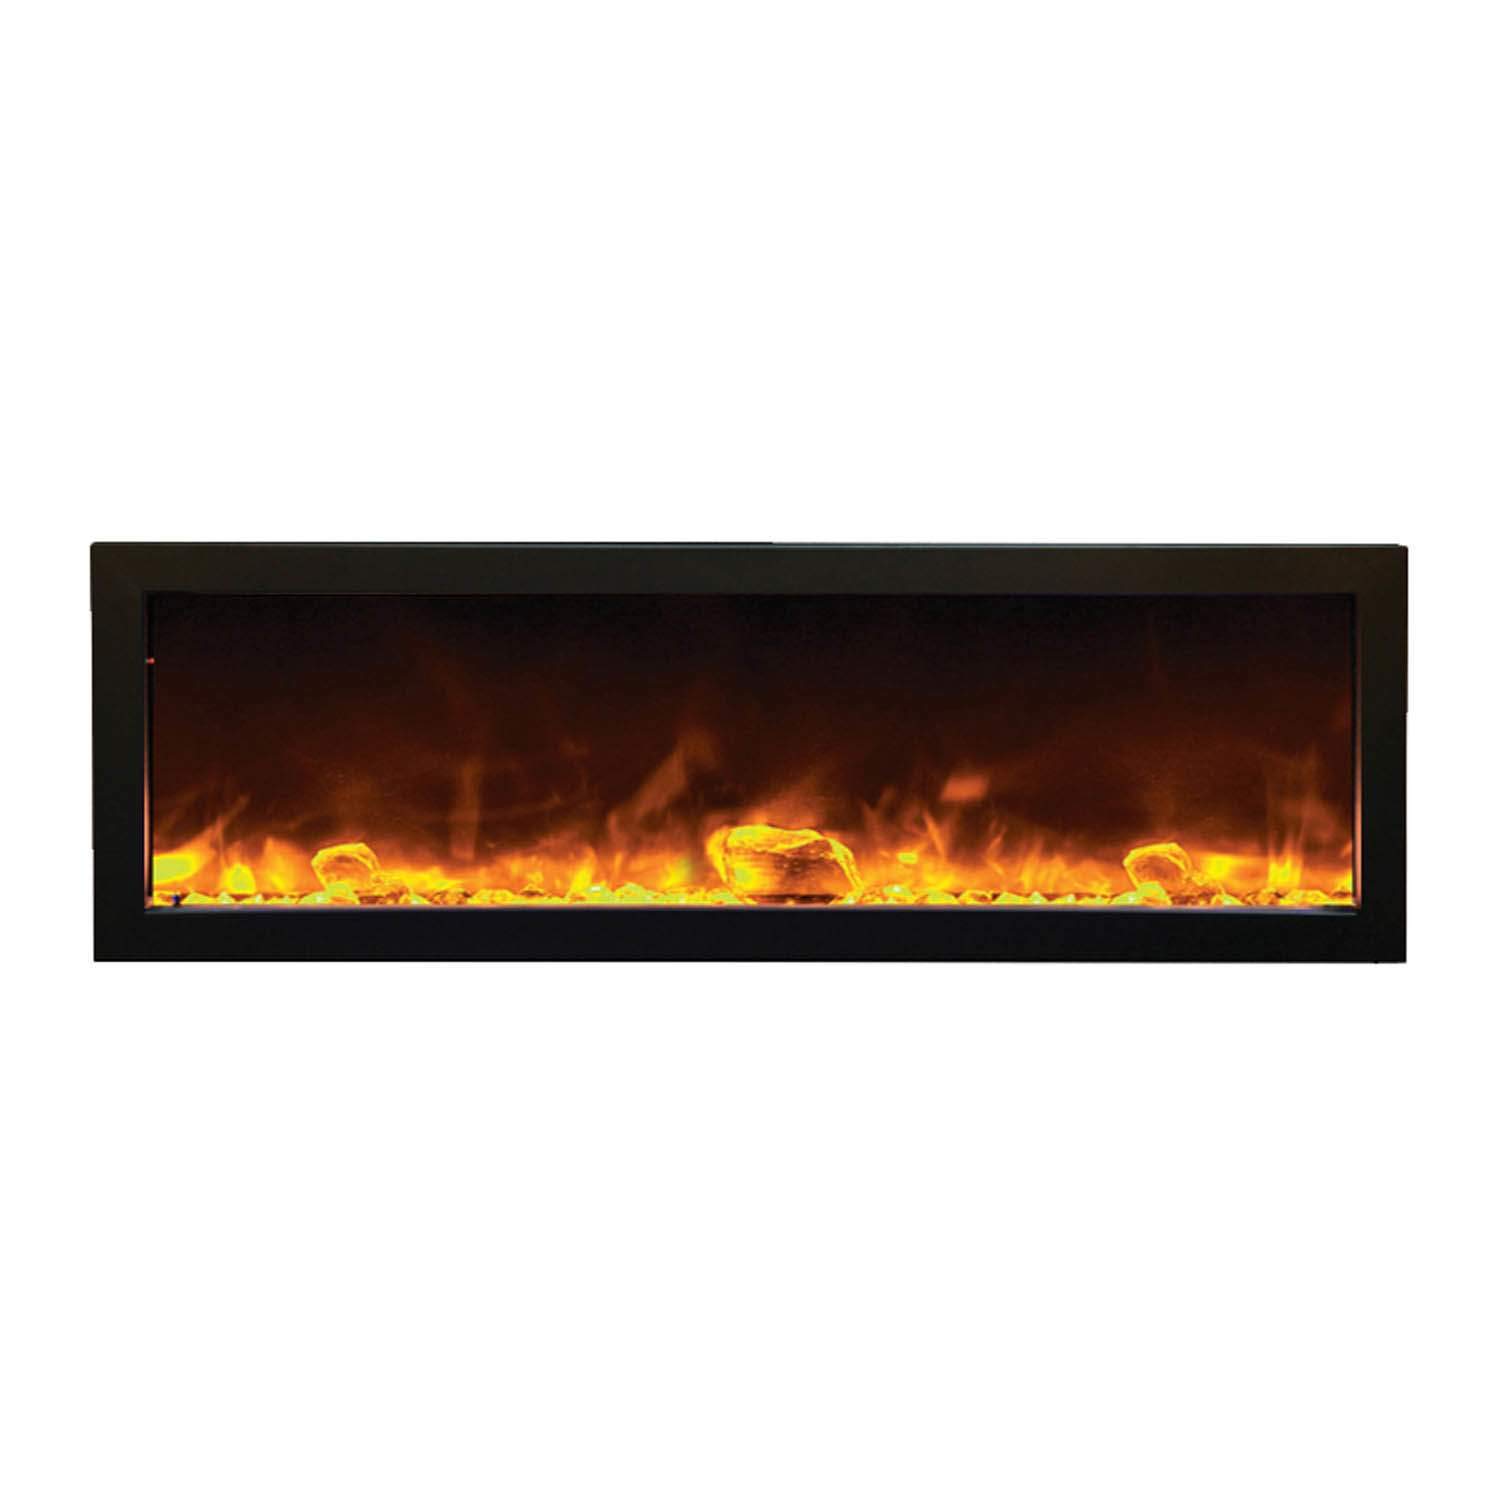 Large Corner Electric Fireplace Awesome 19 Awesome 50 Inch Recessed Electric Fireplace